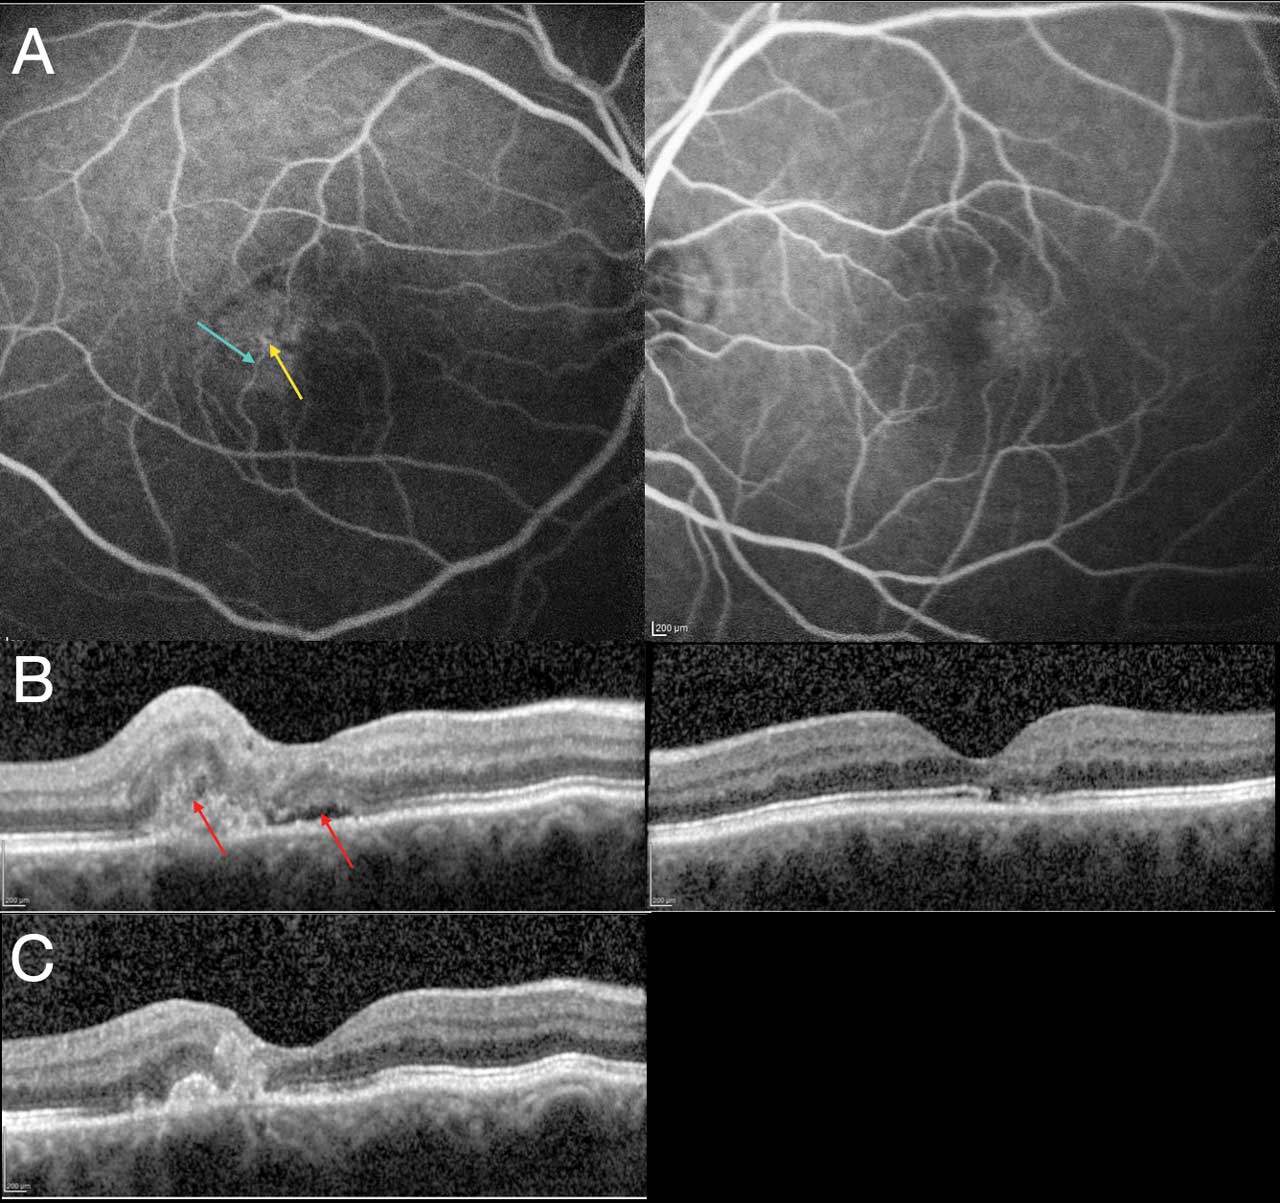 Figure 3.  Fluorescein angiography and optical coherence tomography of a patient with neovascular macular telangiectasia. Yellow arrow highlights an aneurysmal vascular change; blue arrow shows a proximal anastomosis (A). On optical coherence tomography imaging, there is new subretinal fluid with intraretinal disorganization (most probably indicated intraretinal fluid) out of proportion to what is found in the contralateral eye (B). After the patient is treated with anti-VEGF injection